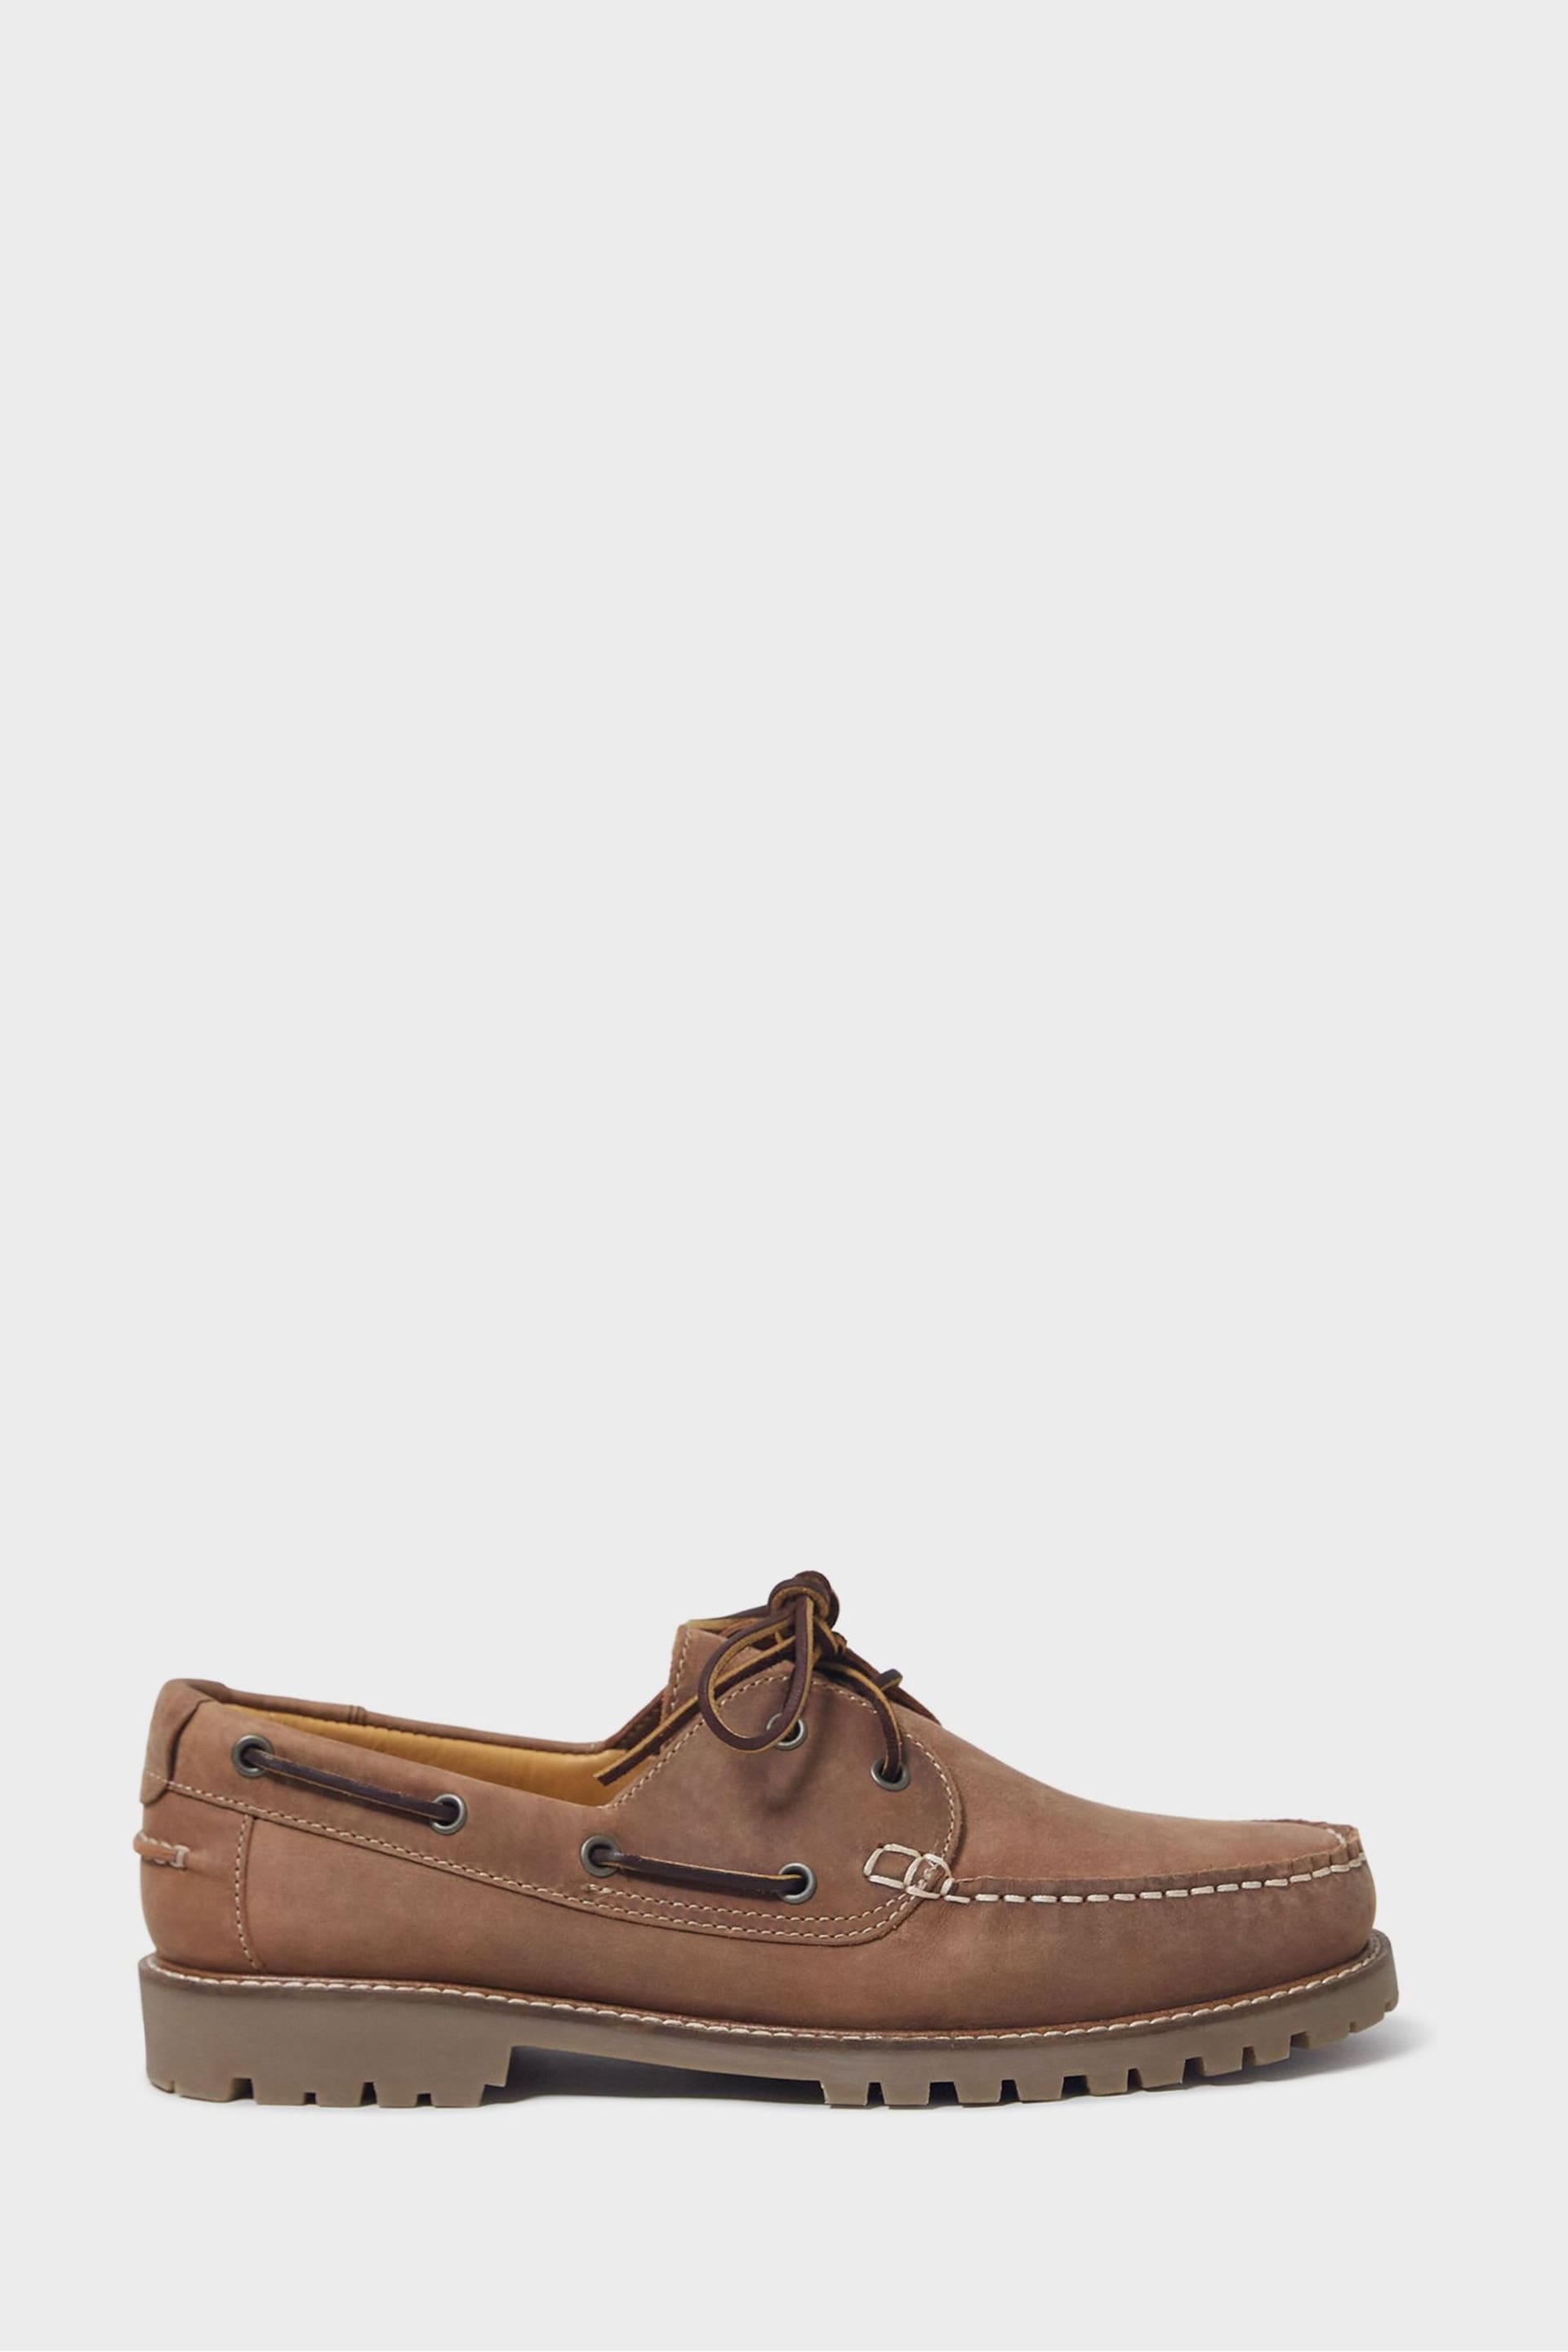 Crew Clothing Leo Leather Chunky Deck Shoes - Image 1 of 4